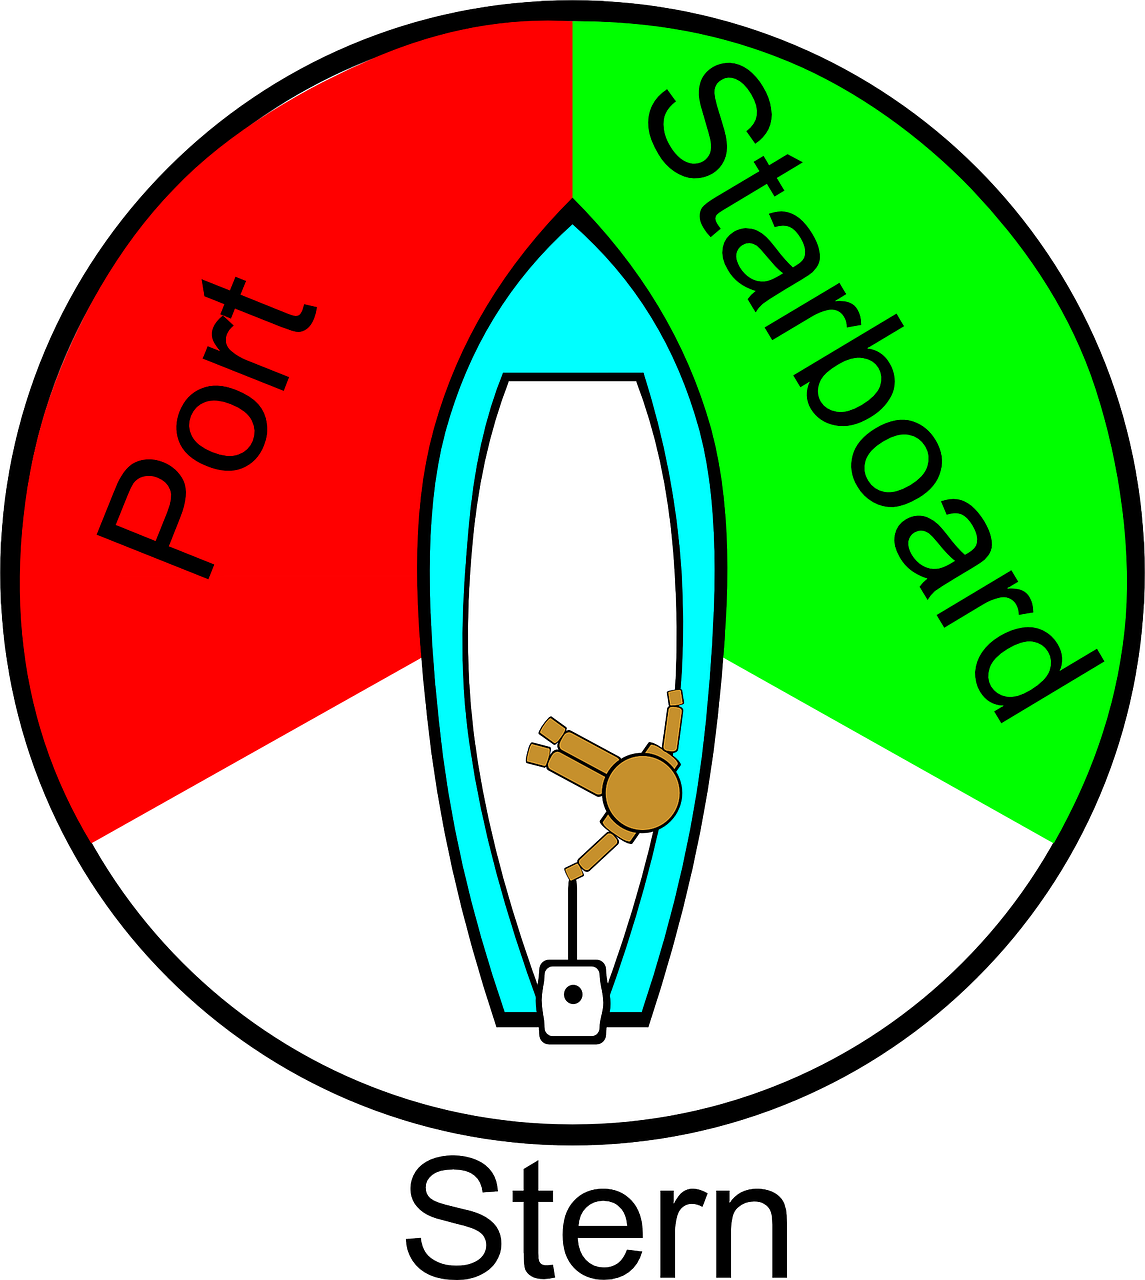 illustration showing port and starboard on a boat